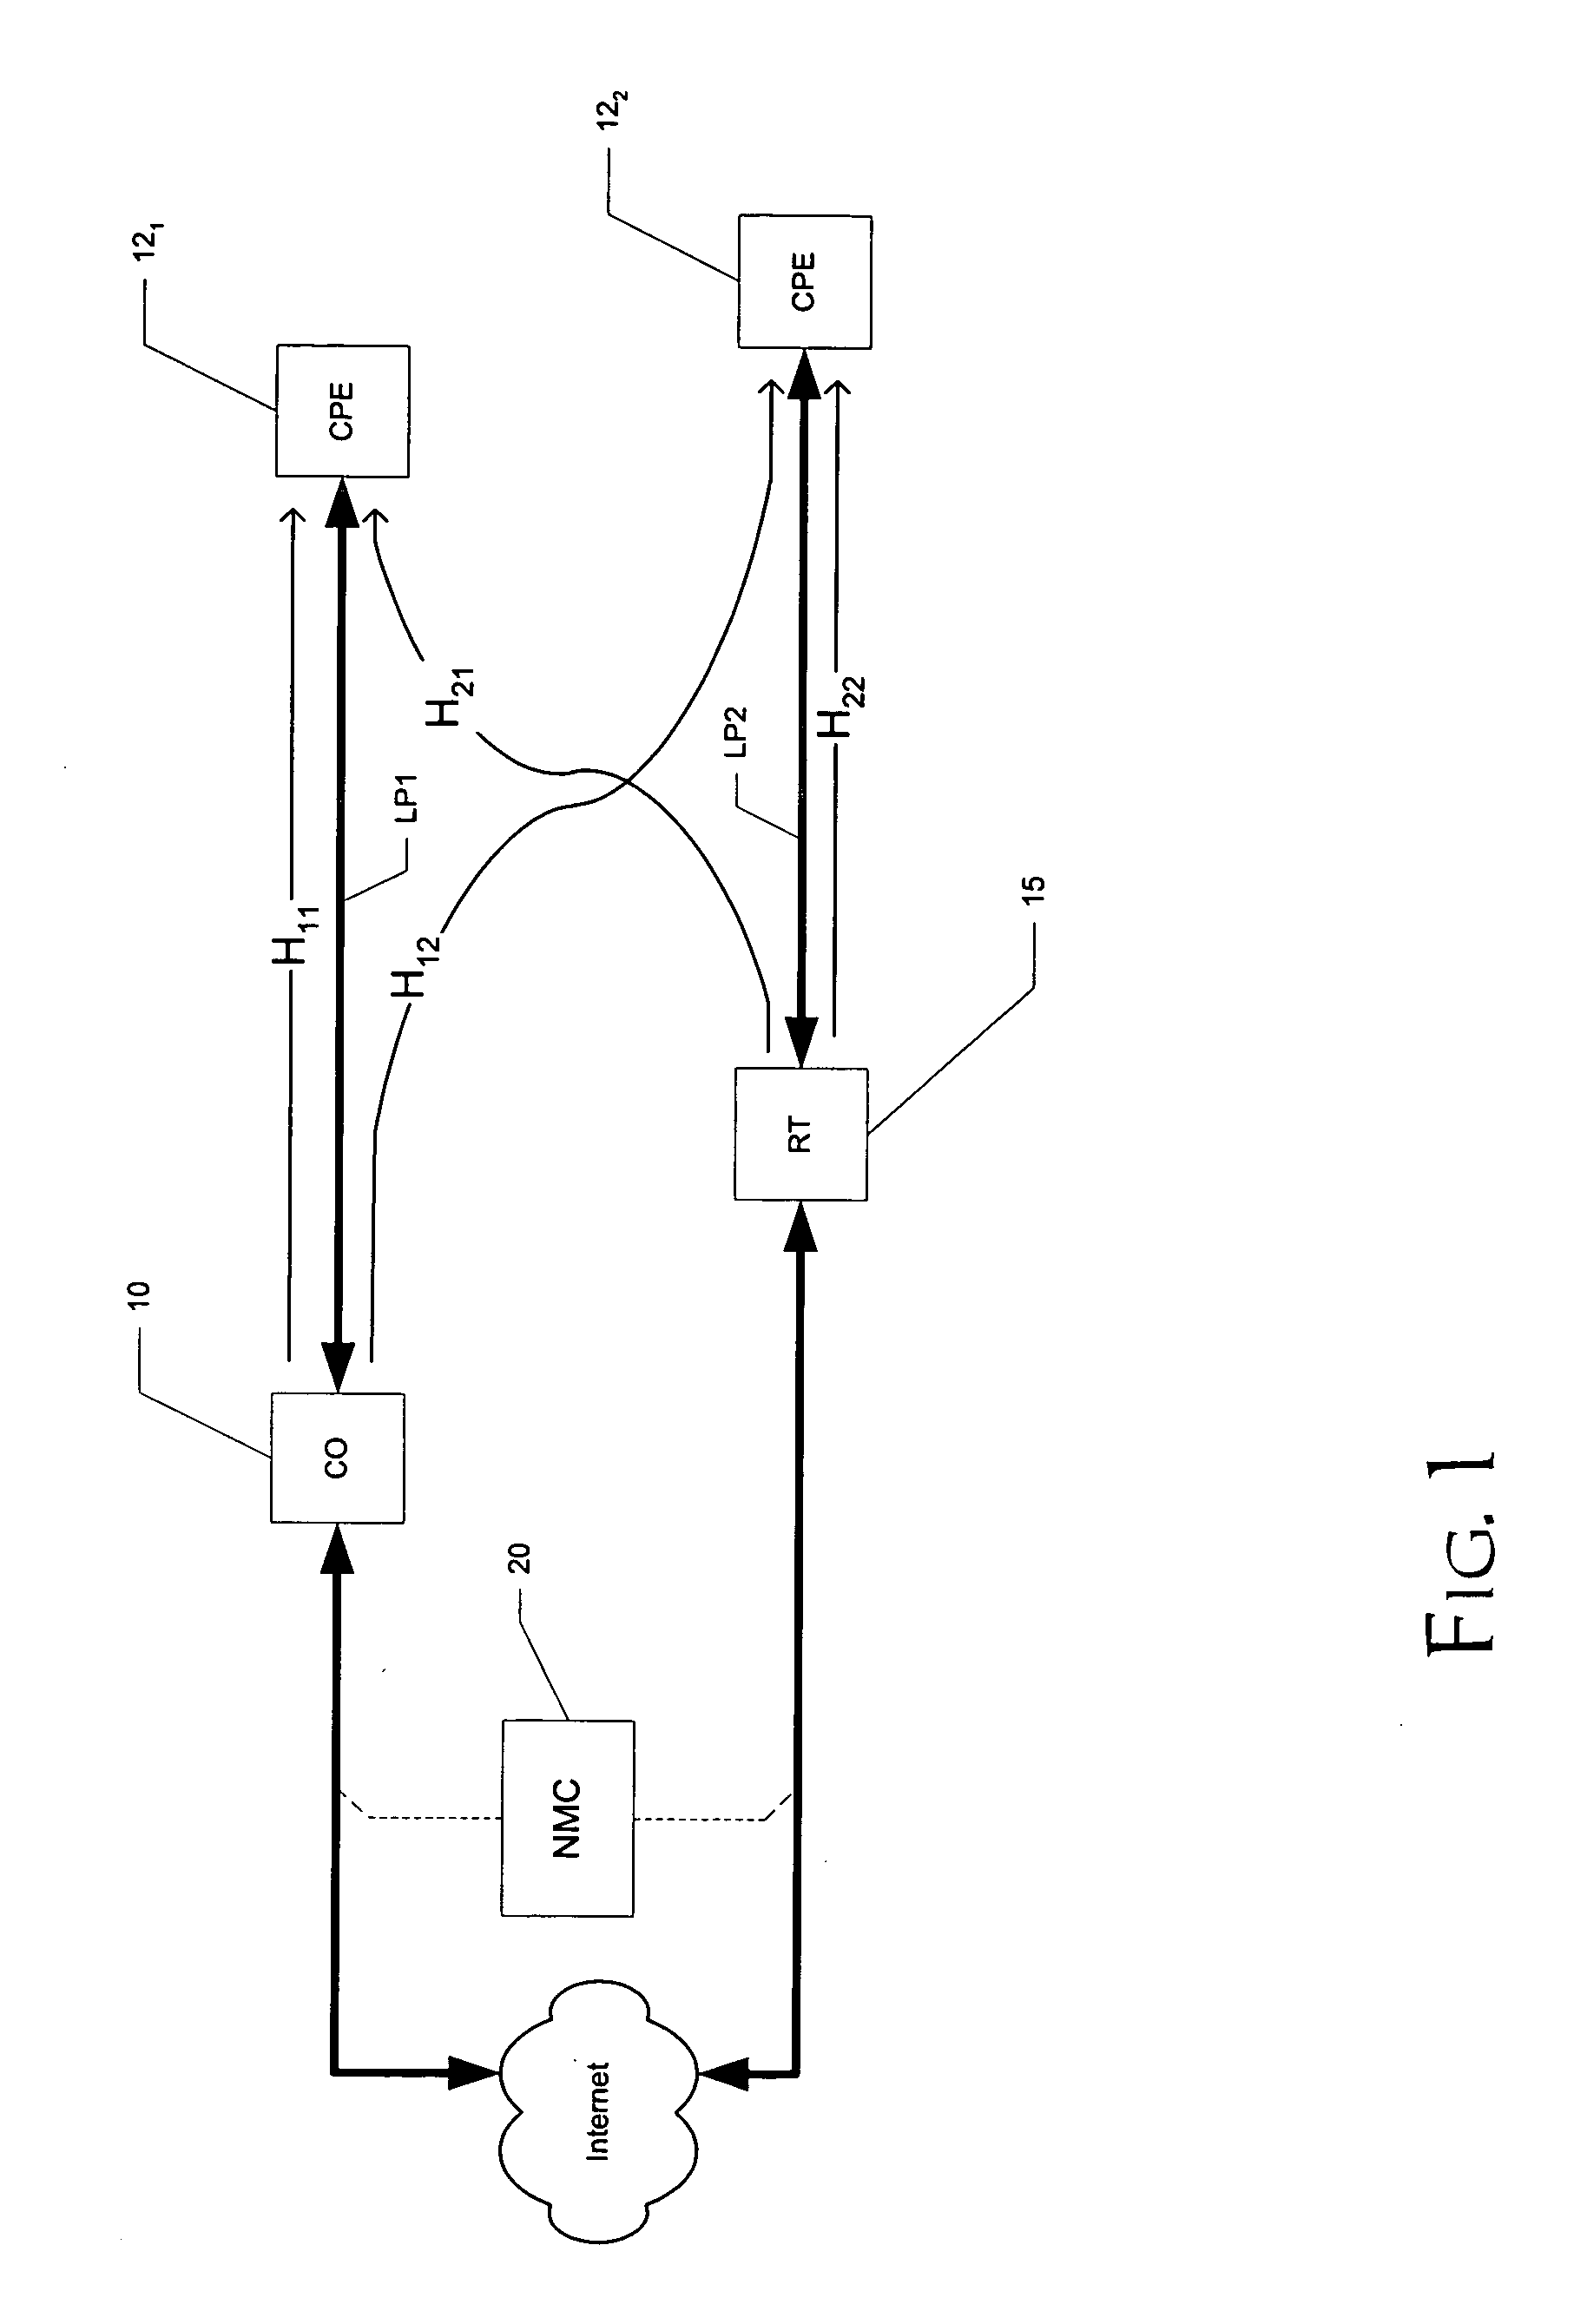 Semi-distributed power spectrum control for digital subscriber line communications